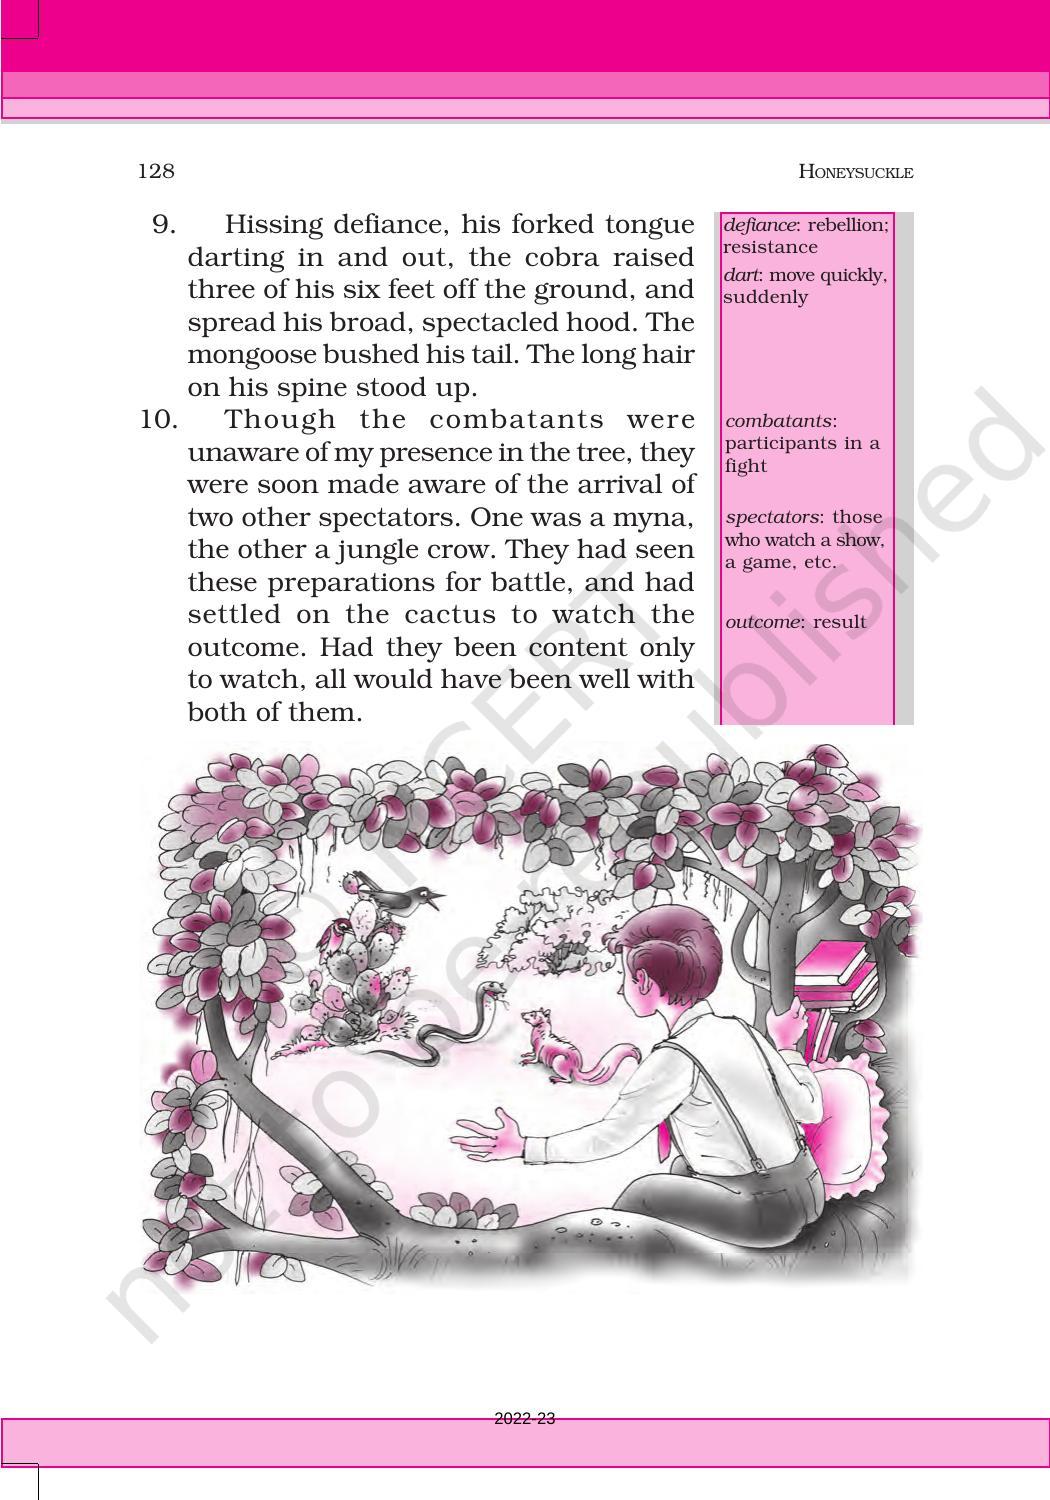 NCERT Book for Class 6 English(Honeysuckle) : Chapter 10-The Banyan Tree - Page 5